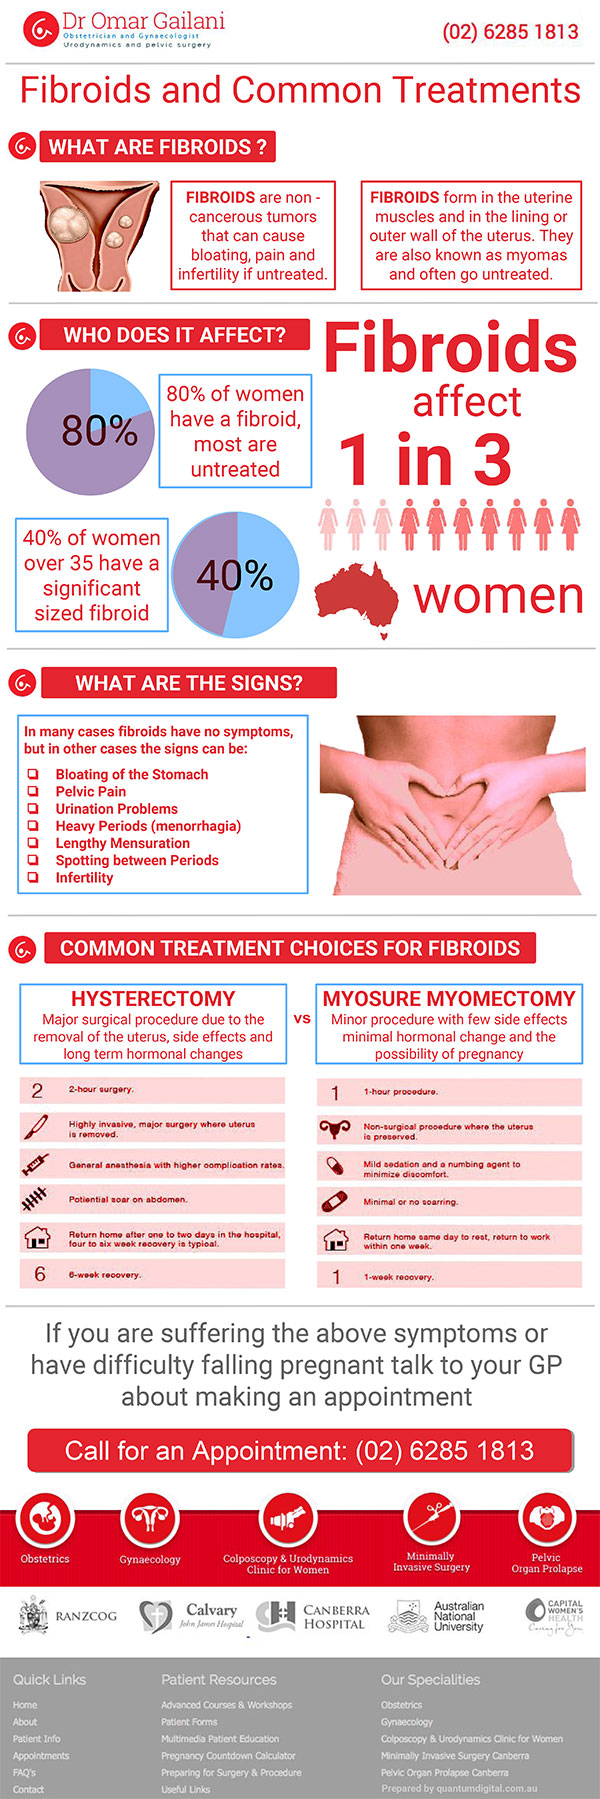 Fibroids and Common Treatments